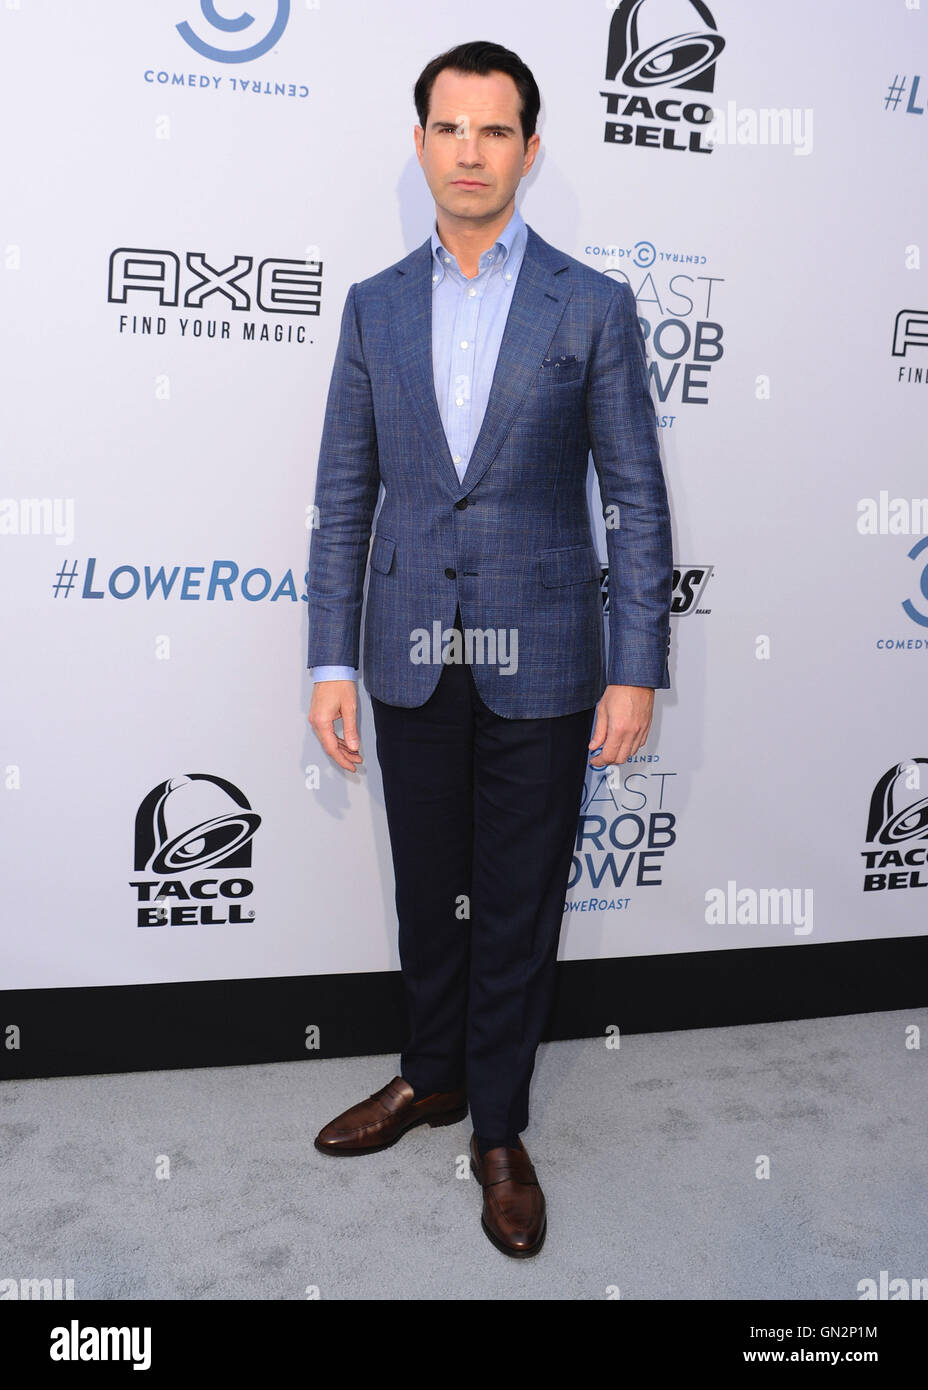 Los Angeles, California, USA. 27th August, 2016.  Jimmy Carr at the Comedy Central Roast of Rob Lowe at Sony Studios on August 27, 2016 in Los Angeles, California. Credit:  MediaPunch Inc/Alamy Live News Stock Photo